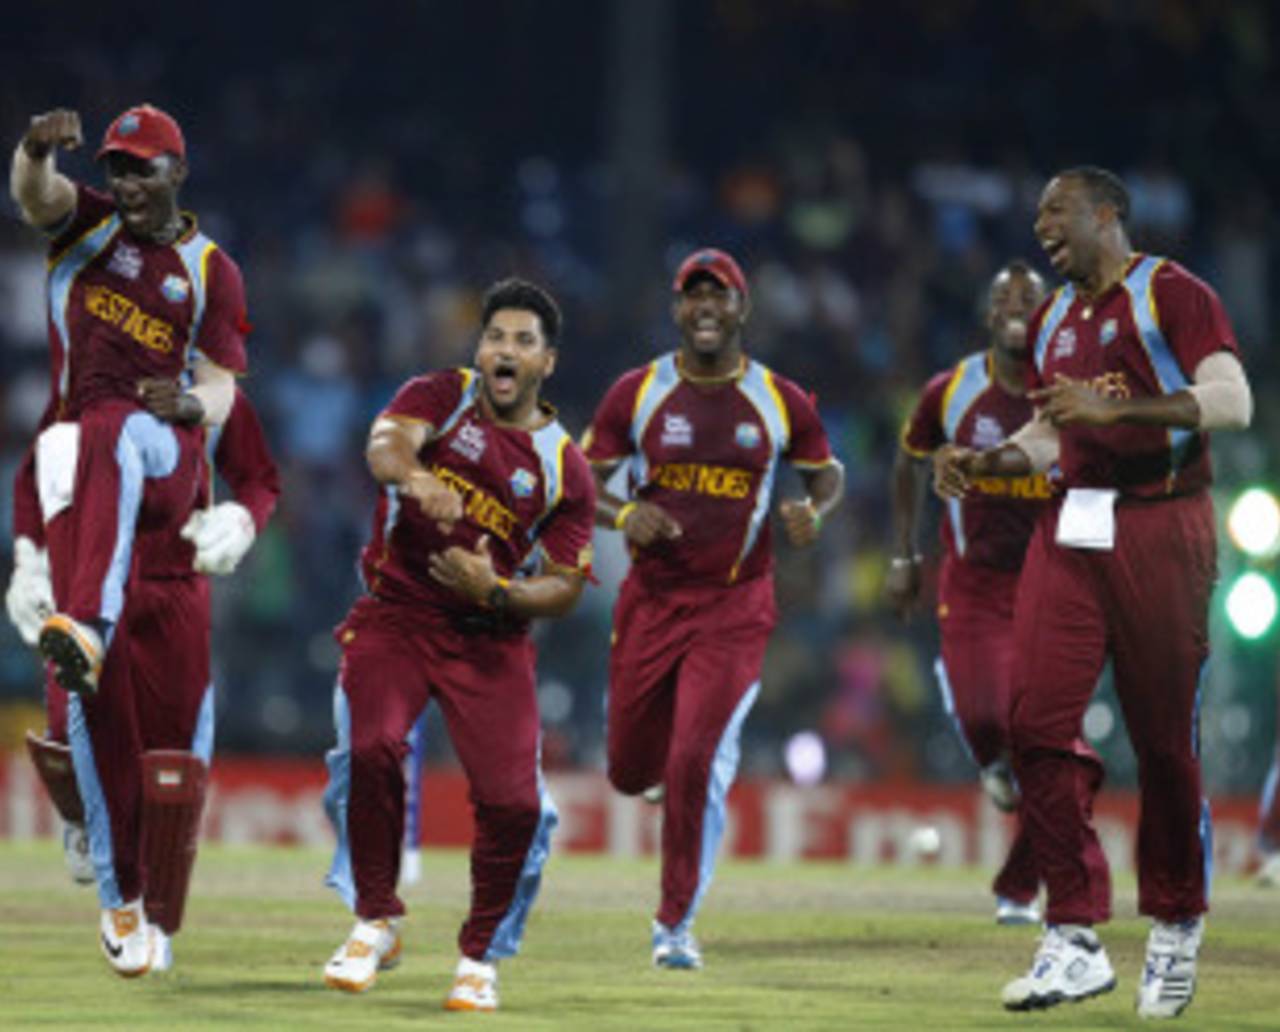 Ravi Rampaul celebrates a wicket with his team-mates, Australia v West Indies, 2nd semi-final, World Twenty20 2012, Colombo, October 5, 2012